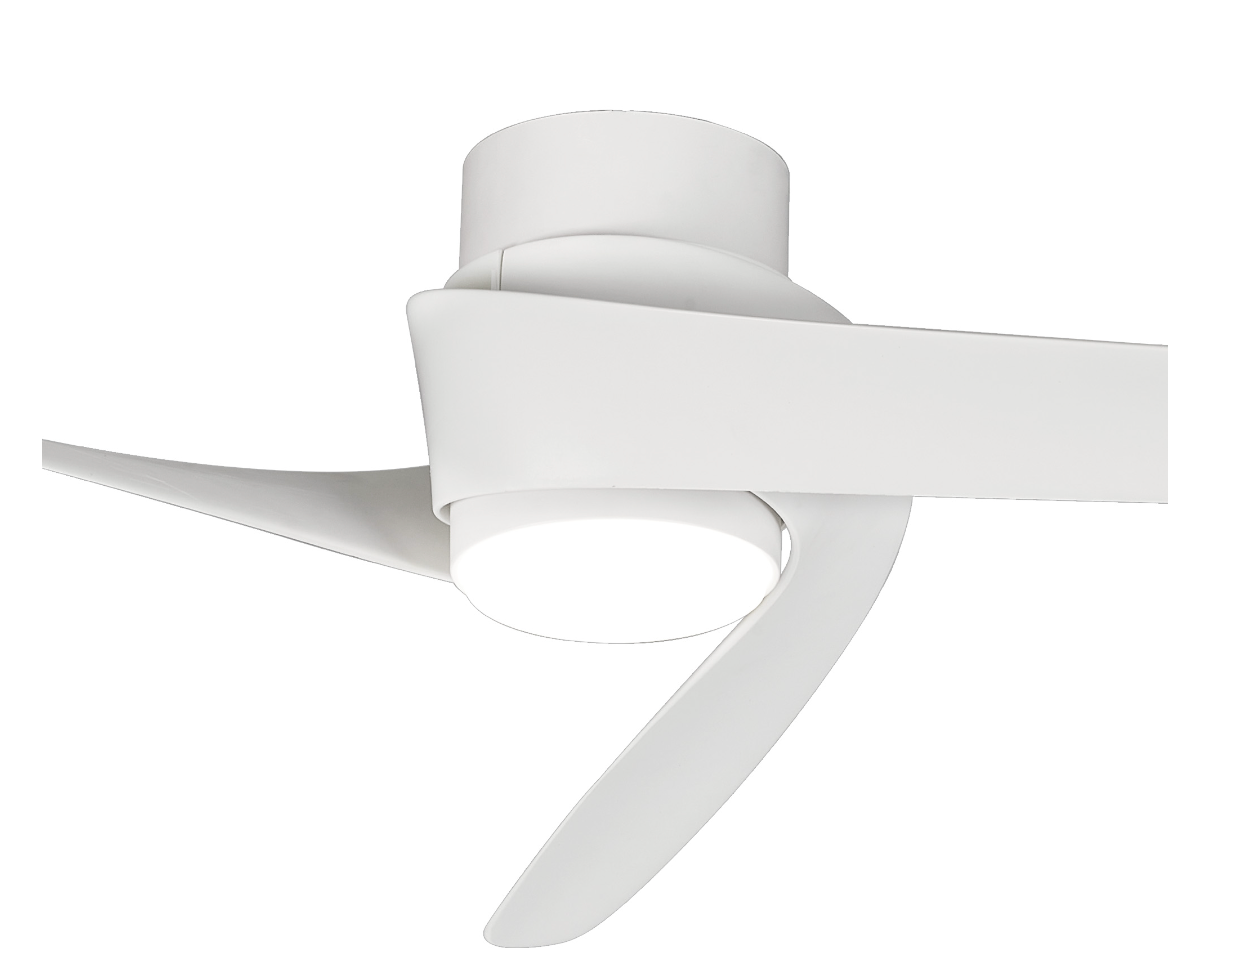 LED Ceiling Light With Built In Fan, White - ID 13130